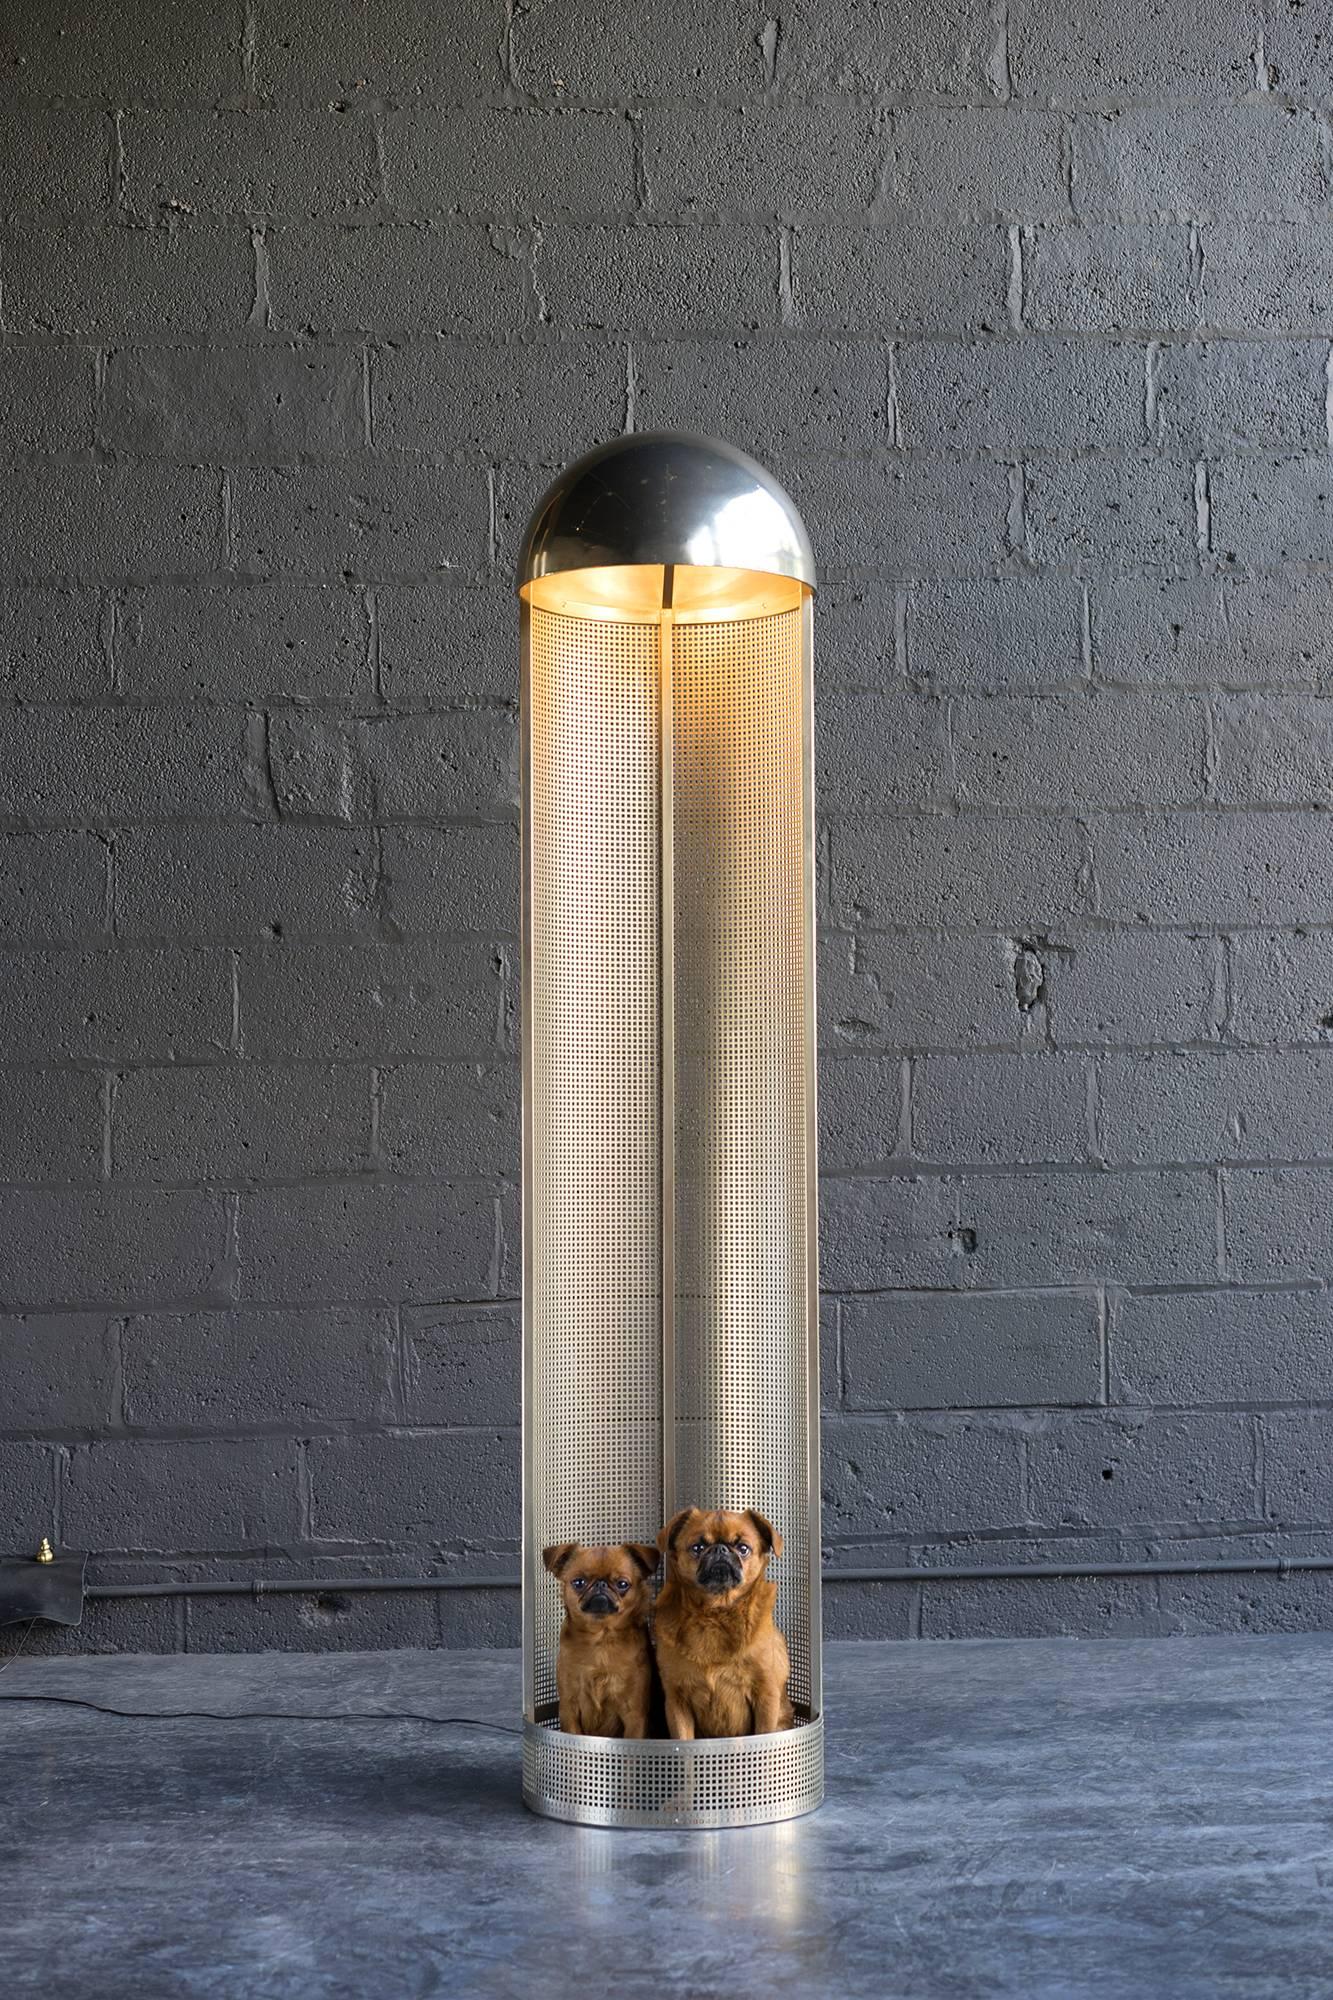 Design from the early period of the Wiener Werkstatte, circa 1903. This is a later reissue, circa 1980. Nickel finish. Dome over two medium base sockets. Perforated sheet metal creates nice play of light and shadow.